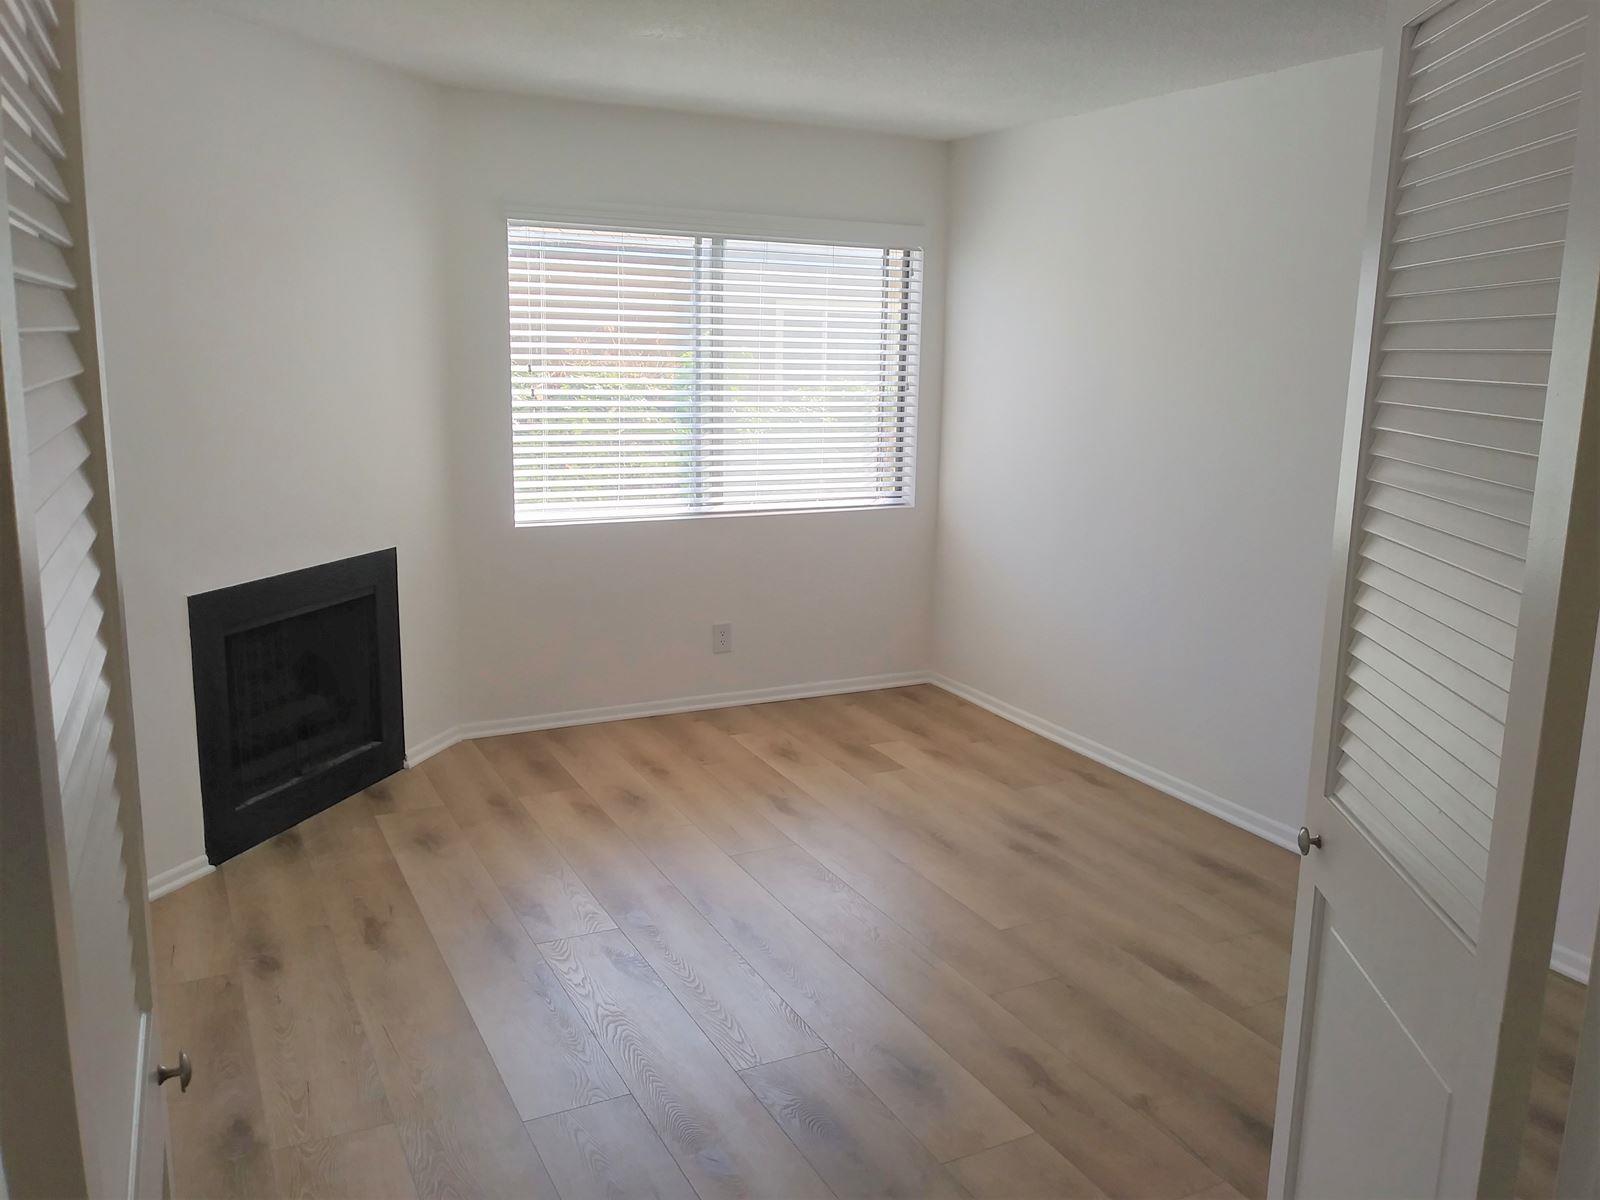 Apartment for rent in Culver City, CA 90232, 2 Beds, 1 Bath